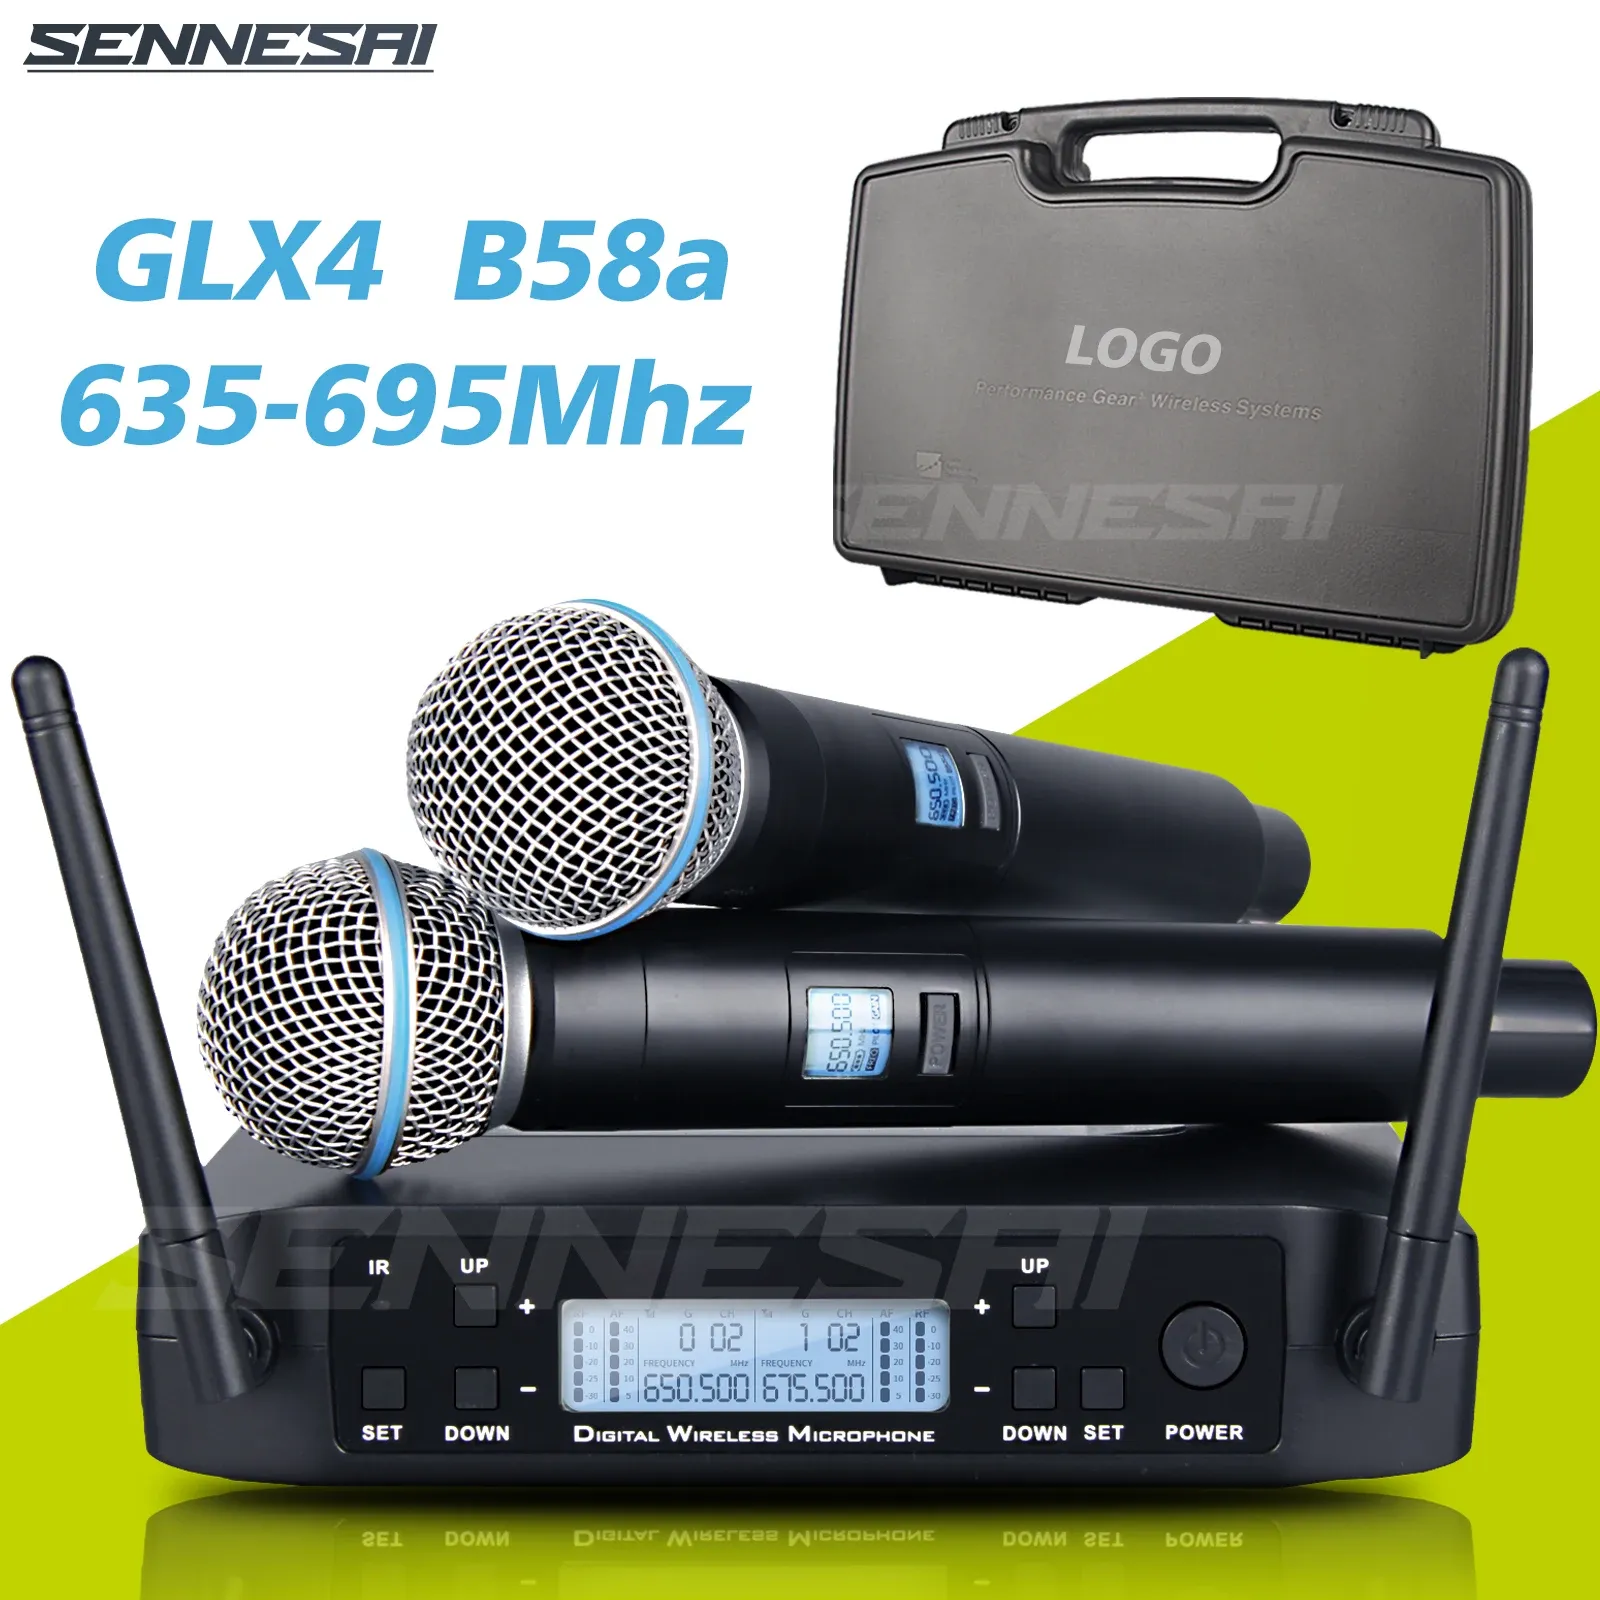 Microfones Sennesai GLX4 Professional Dual Wireless Microphone 600699MHz System Stage Performances UHF Dynamic 2 Channel Handheld